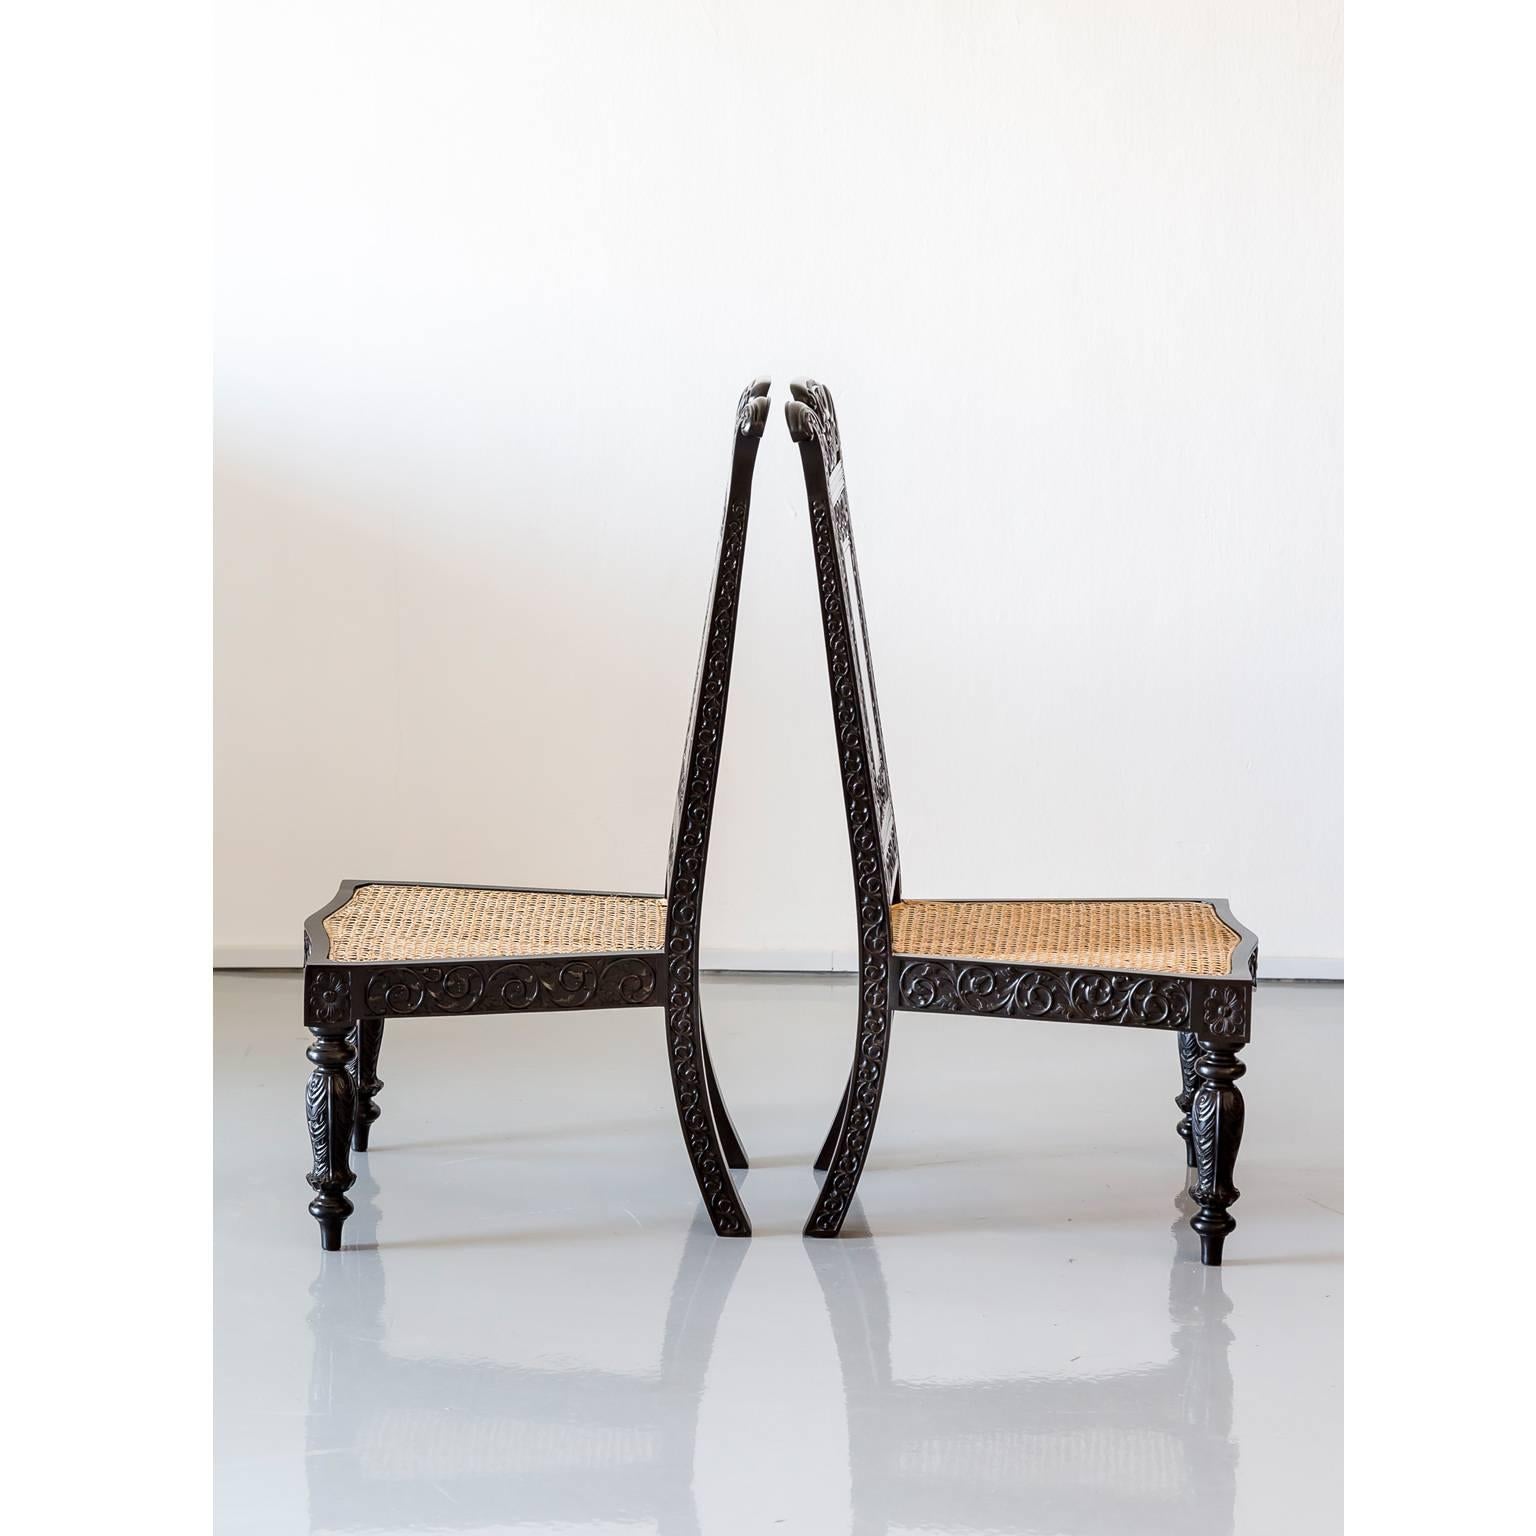 19th Century Pair of Antique Anglo-Indian or British Colonial Ebony Prie-Dieu Chairs For Sale